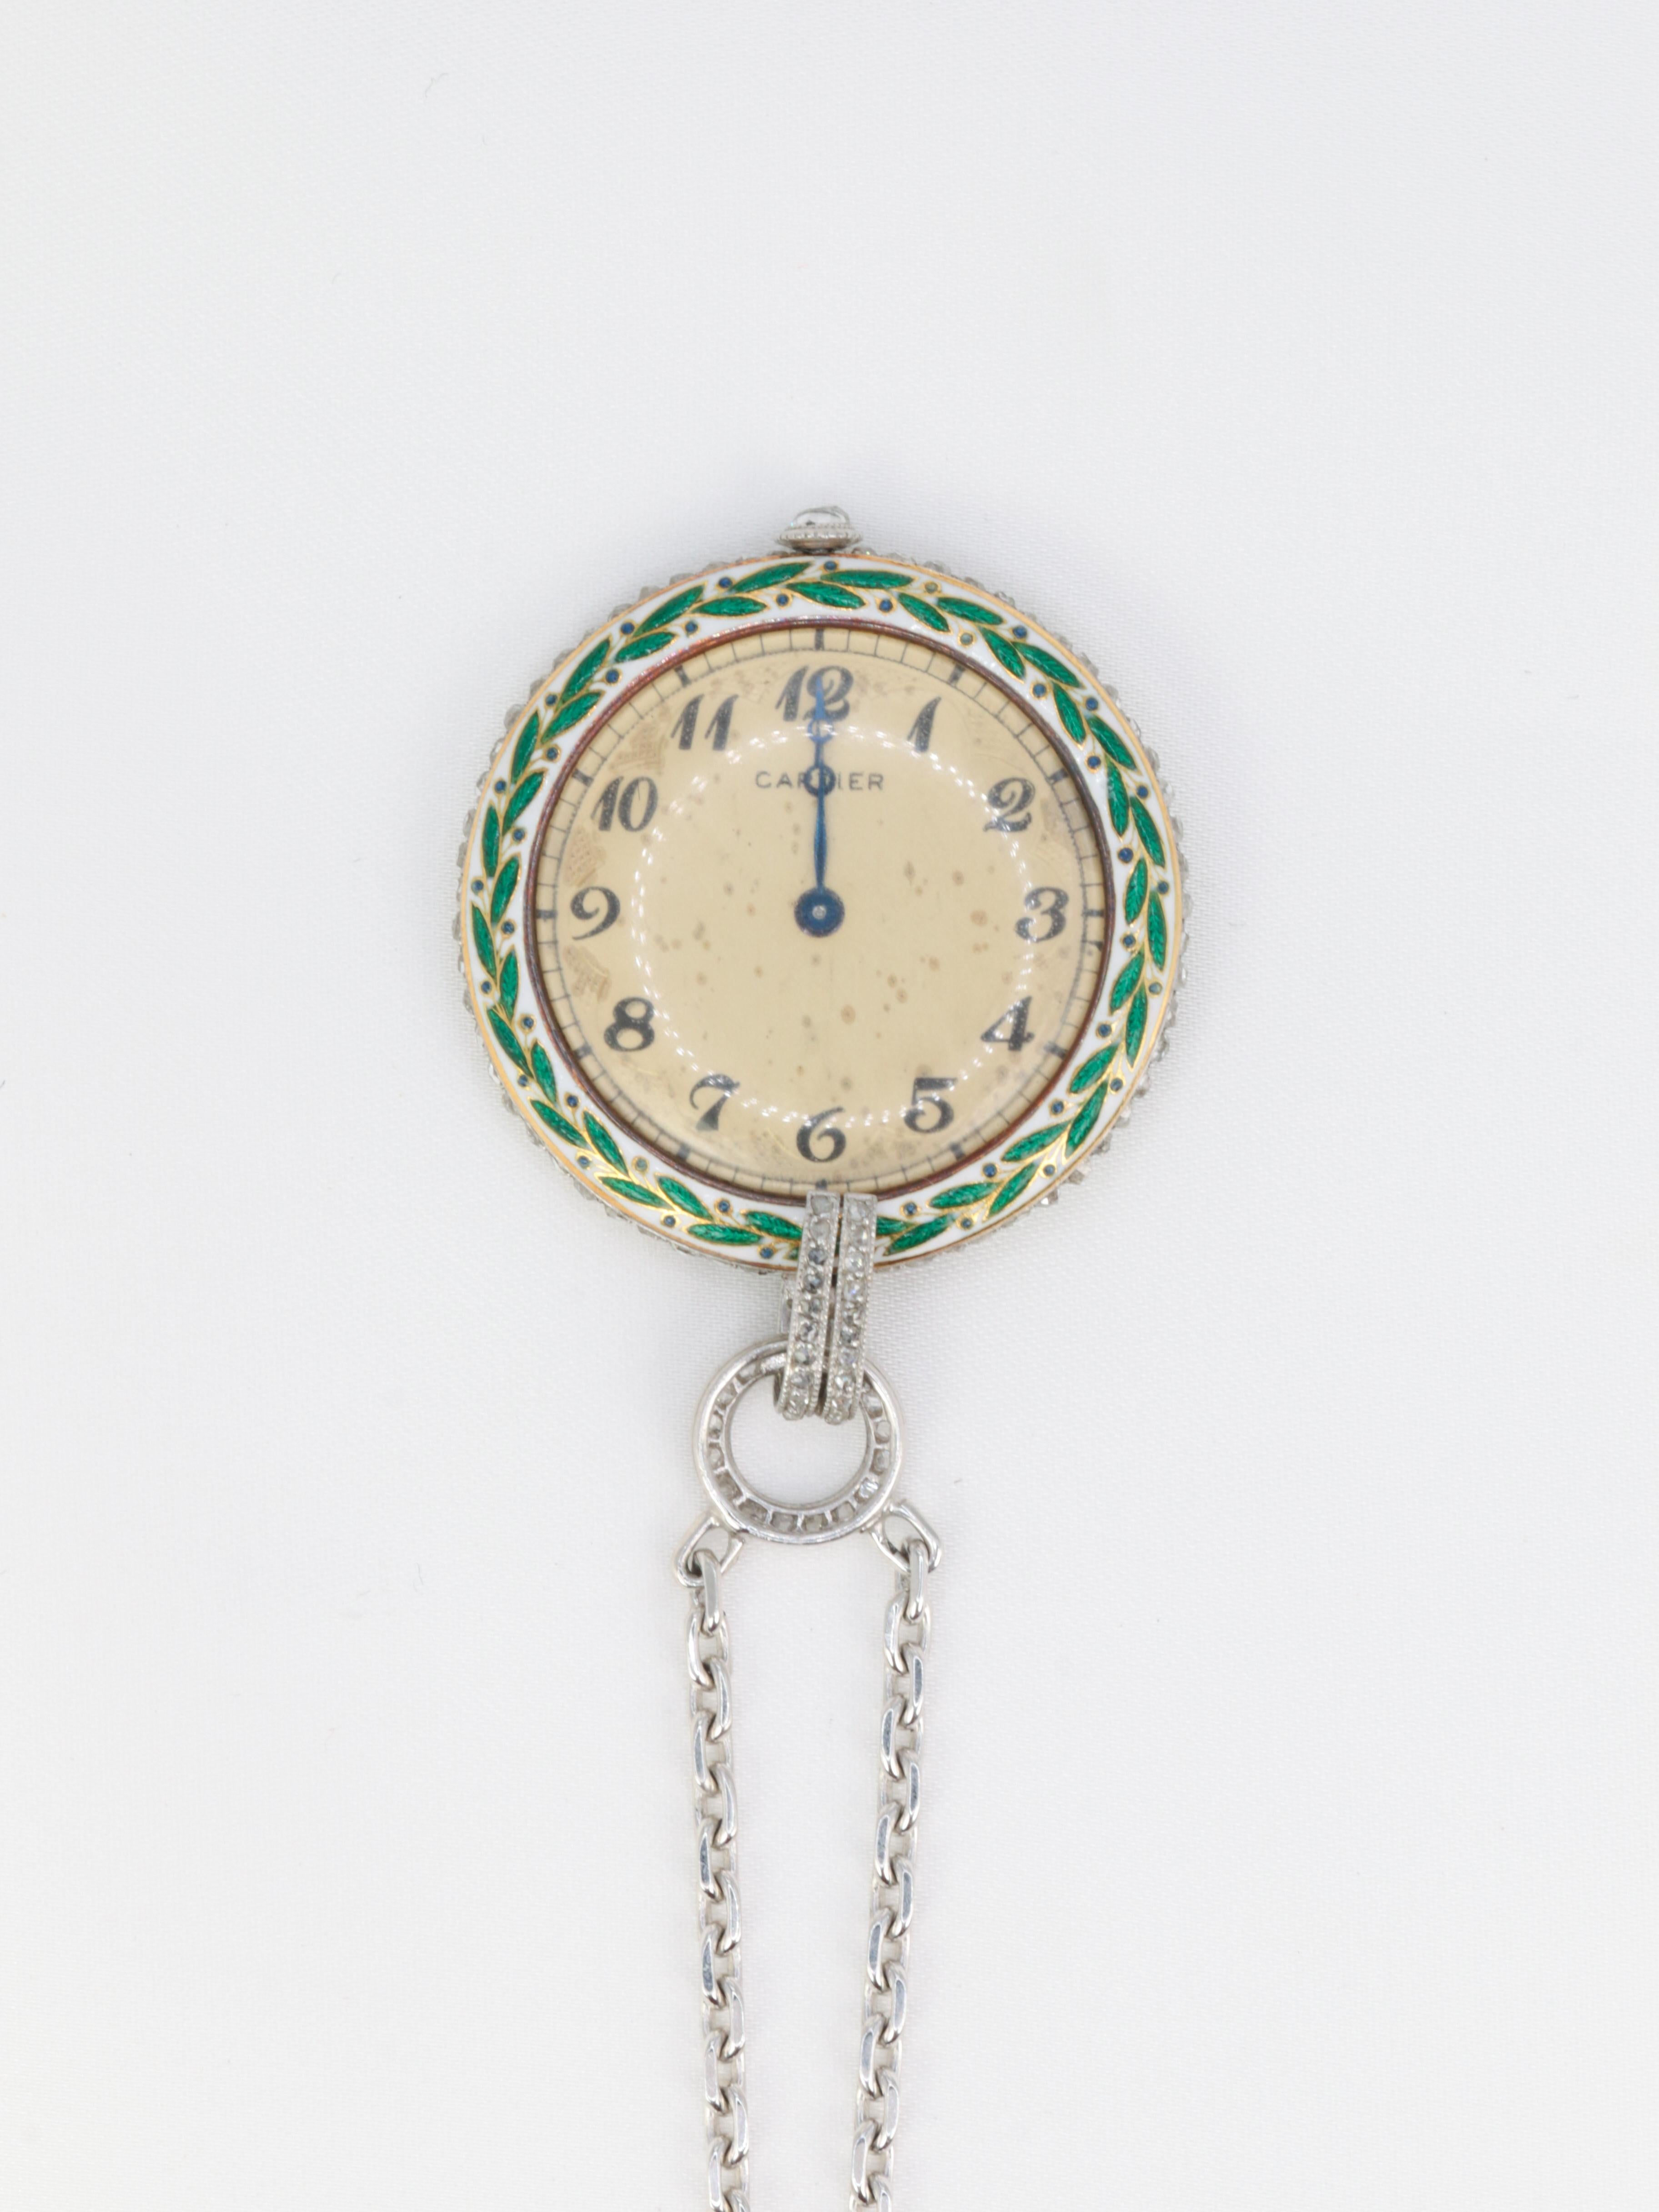 CARTIER, Collar watch - Pendant in gold, diamonds and enamel 1